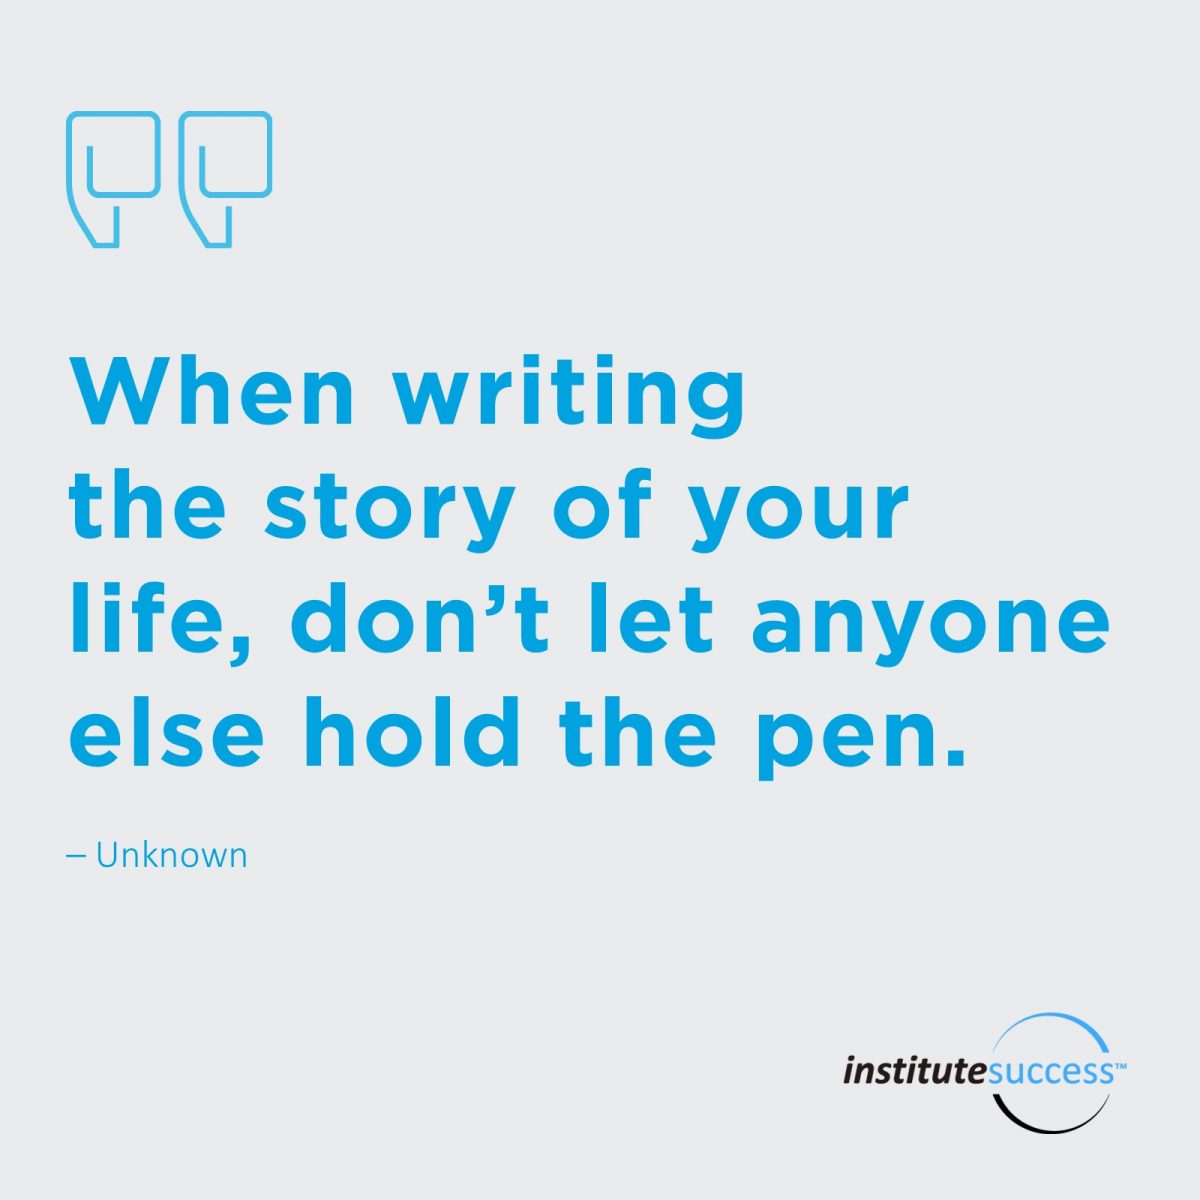 When writing the story of your life, don’t let anyone else hold the pen.  Unknown